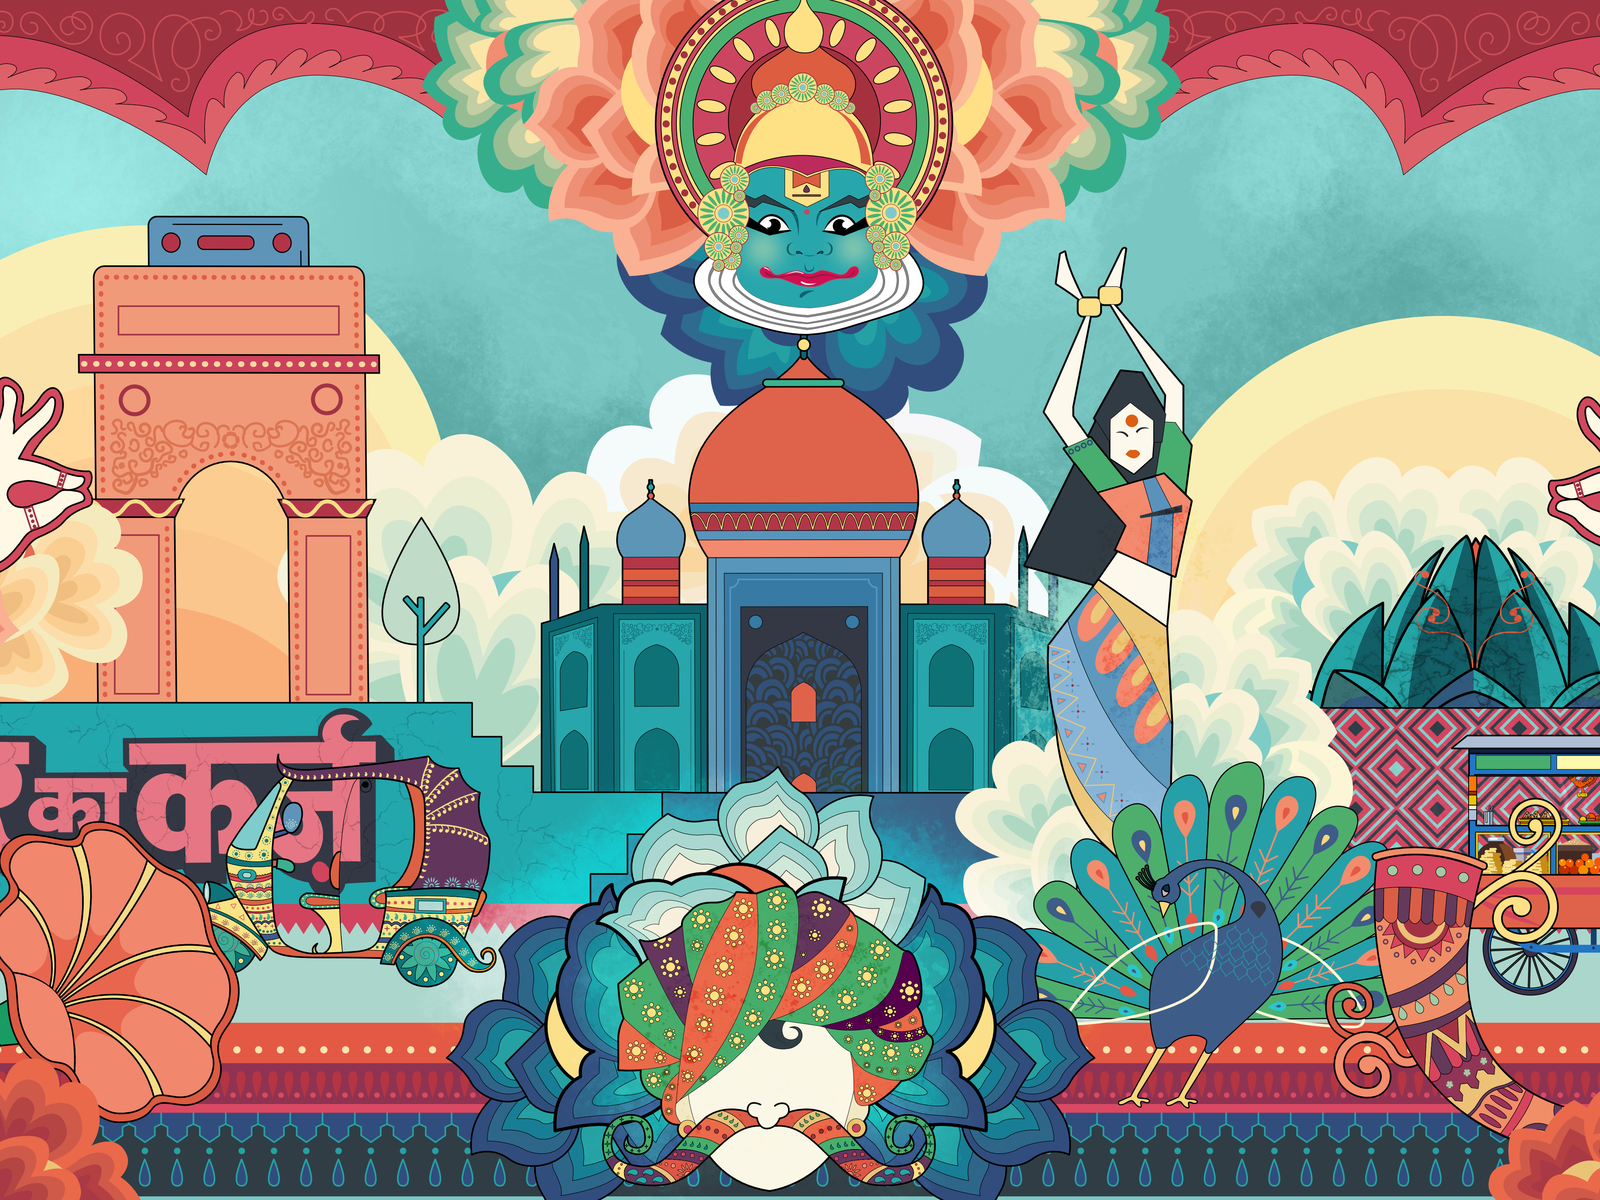 Concept illustration India by Cliffex on Dribbble